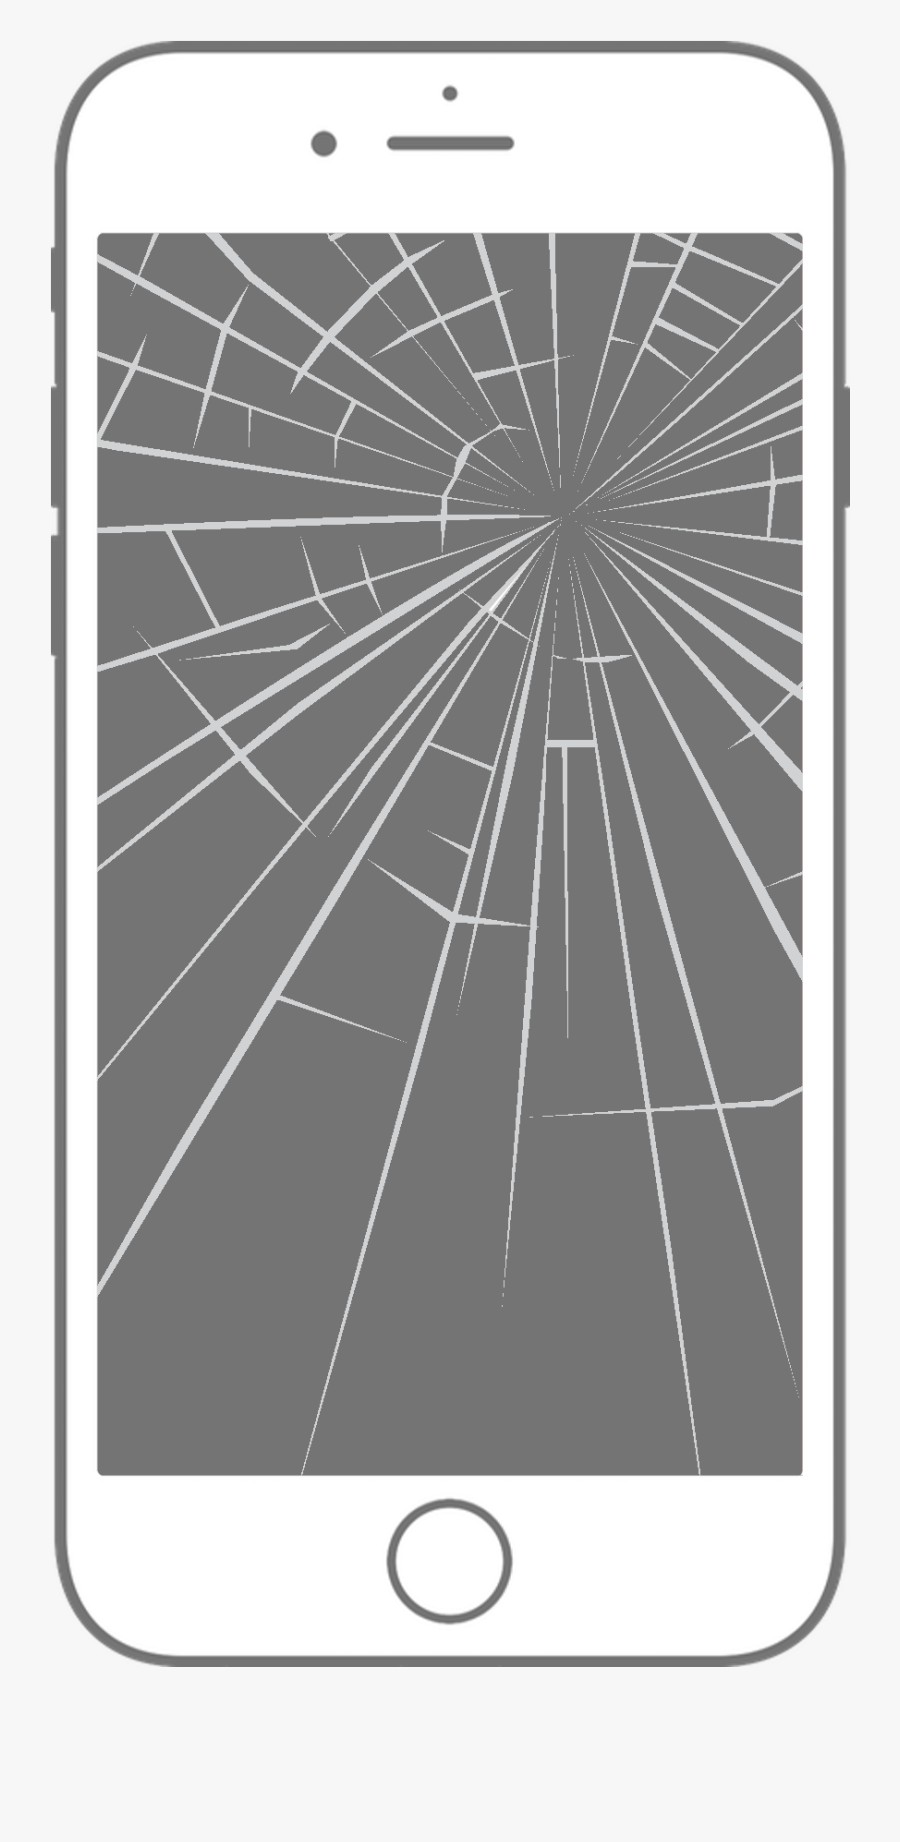 Cracked Screen Png, Transparent Clipart